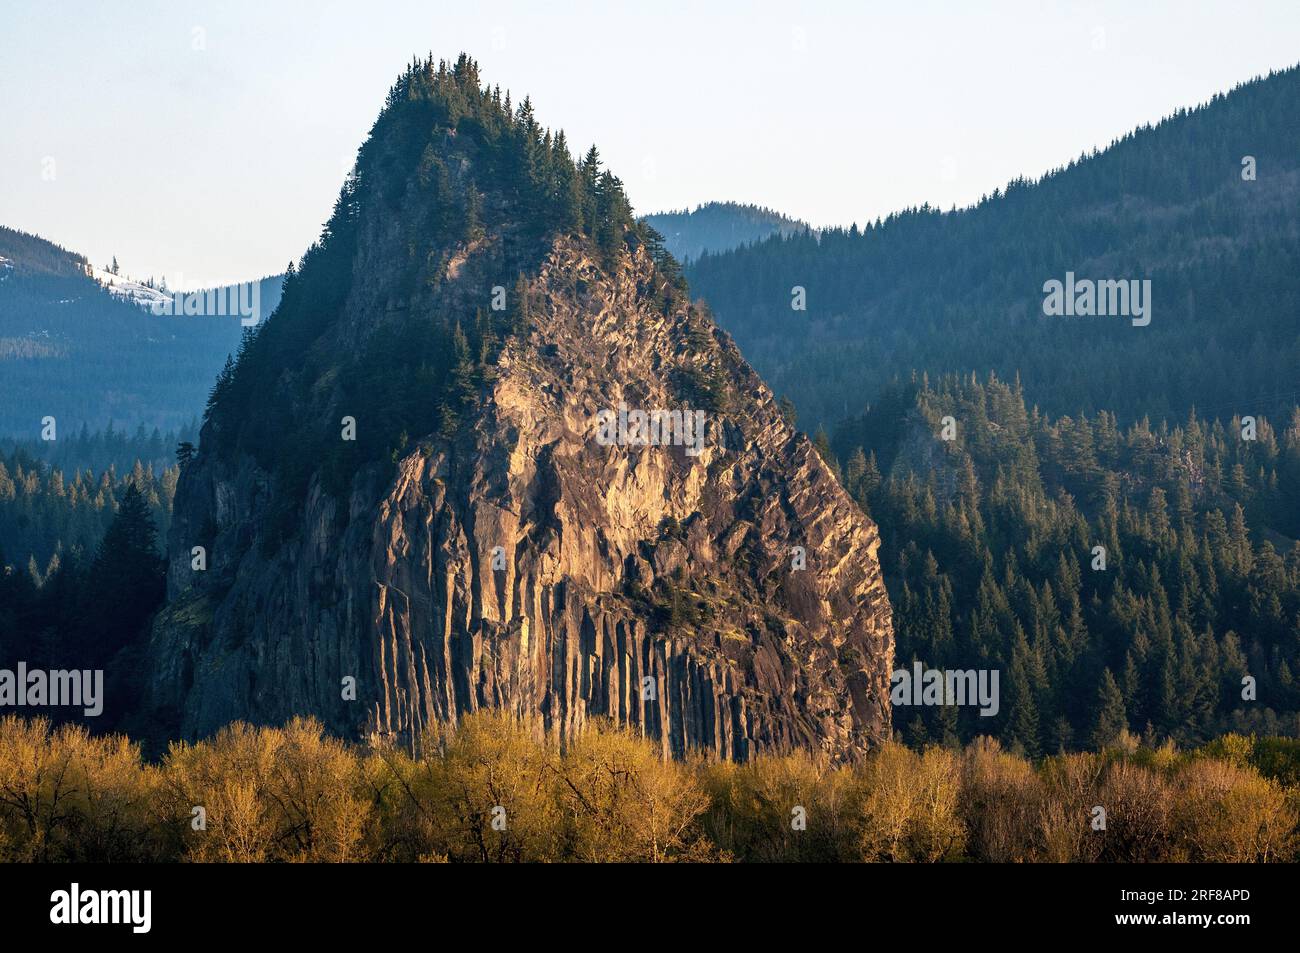 Beacon rock stands above the Columbia River in Washington State. Stock Photo